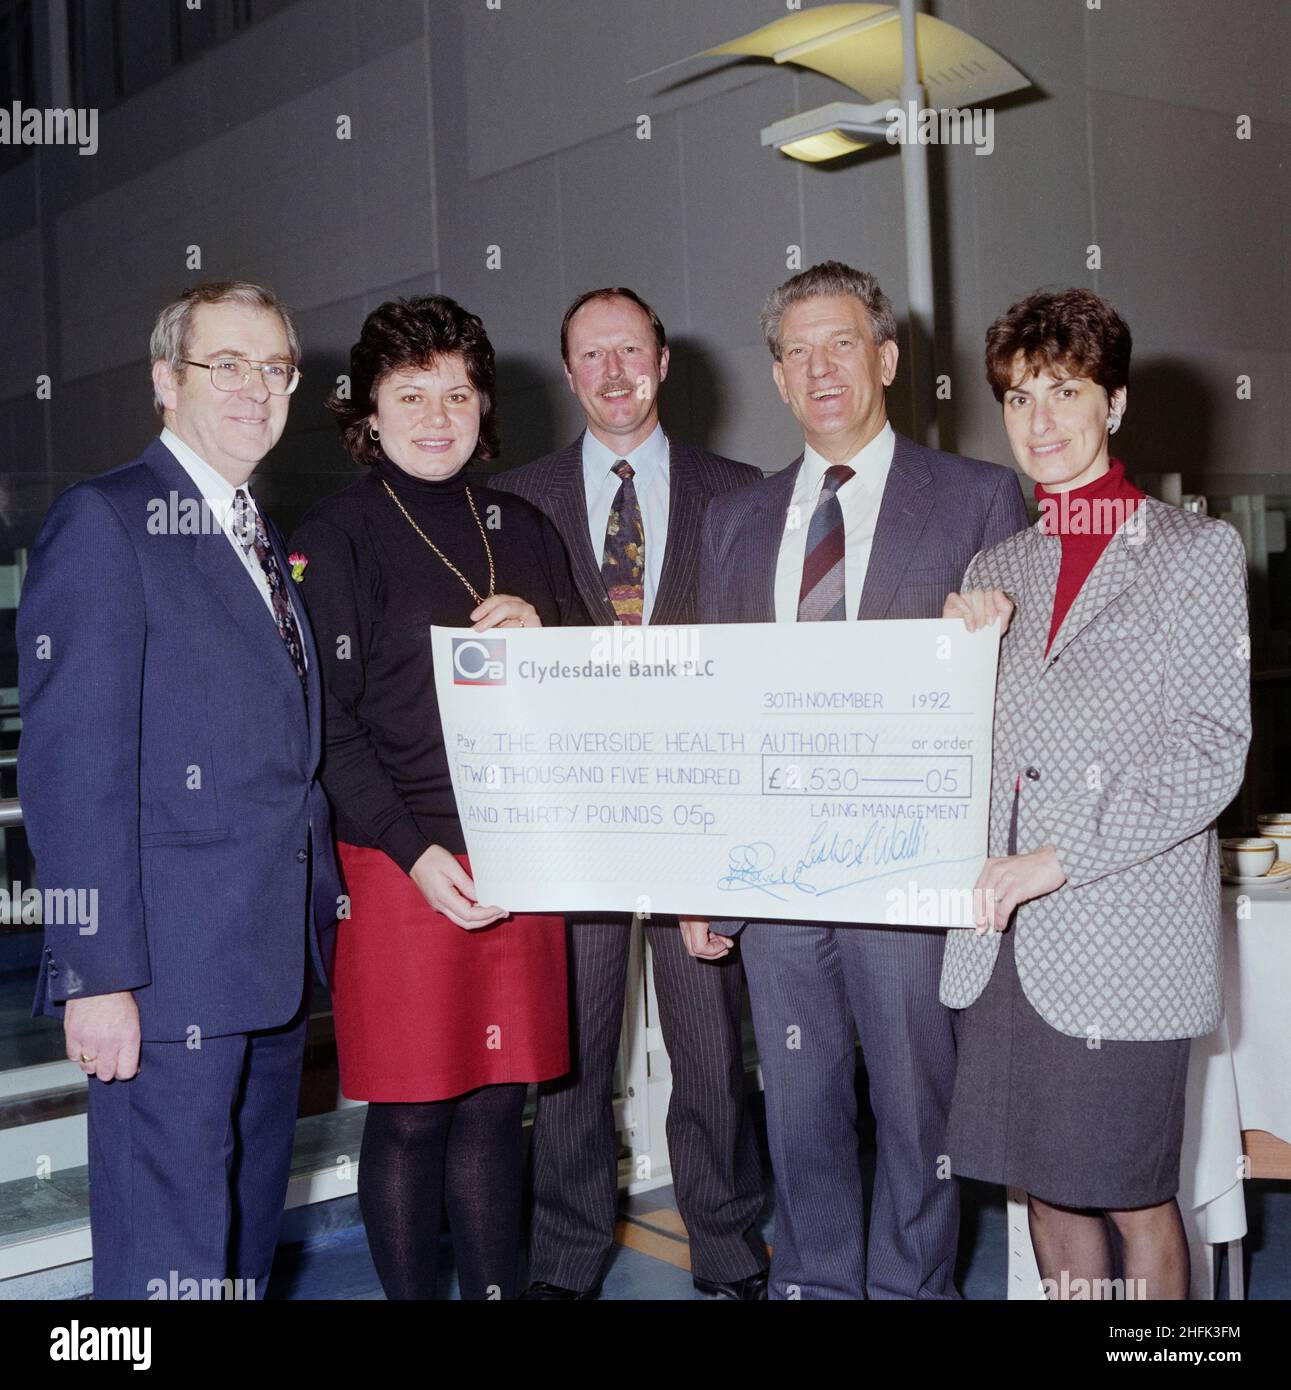 Chelsea and Westminster Hospital, Fulham Road, Kensington and Chelsea, London, 30/11/1992. Representatives of Laing Management and The Riverside Health Authority posed with a large cheque at the handover ceremony for Chelsea and Westminster Hospital. Laing Management held an open day at Chelsea and Westminster Hospital in September 1992, and the proceeds were presented at the hospital's handover ceremony on 30th November. The cheque for &#xa3;2530.05 was presented by Laing staff members Peter Powell and Roger Hopkins to representatives of the Riverside Health Authority. The money was to be use Stock Photo